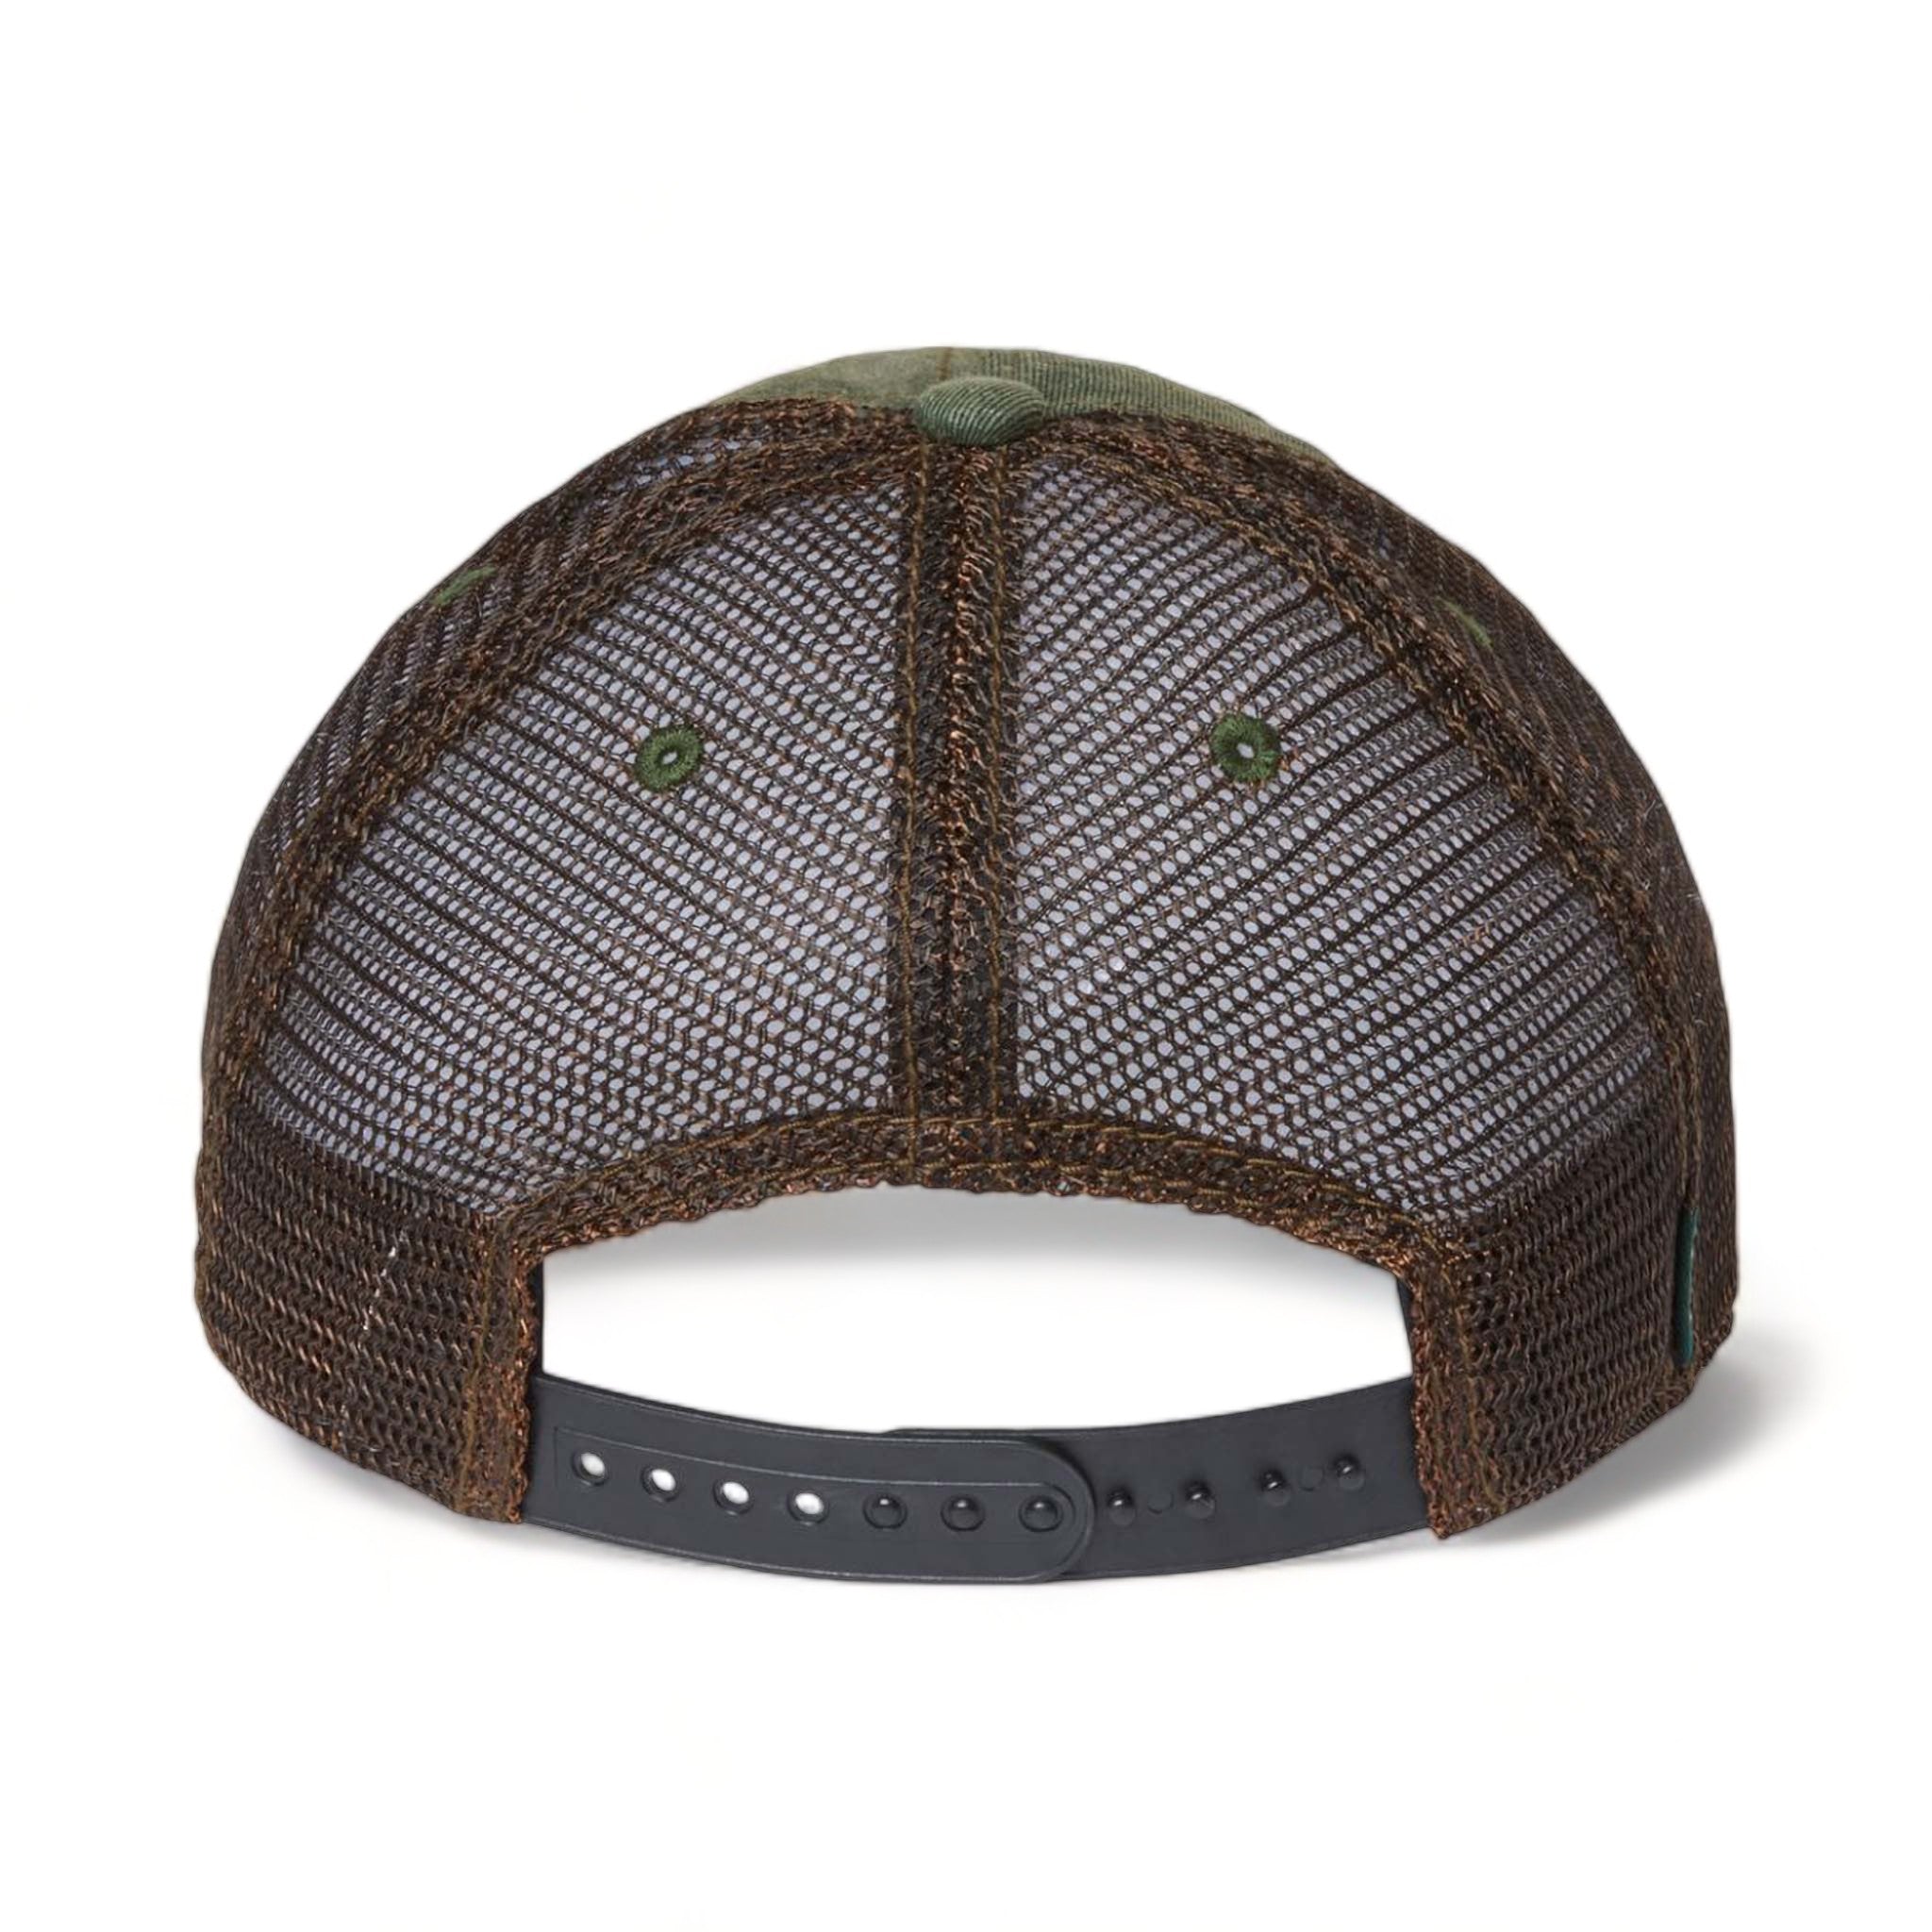 Back view of LEGACY OFA custom hat in green and brown